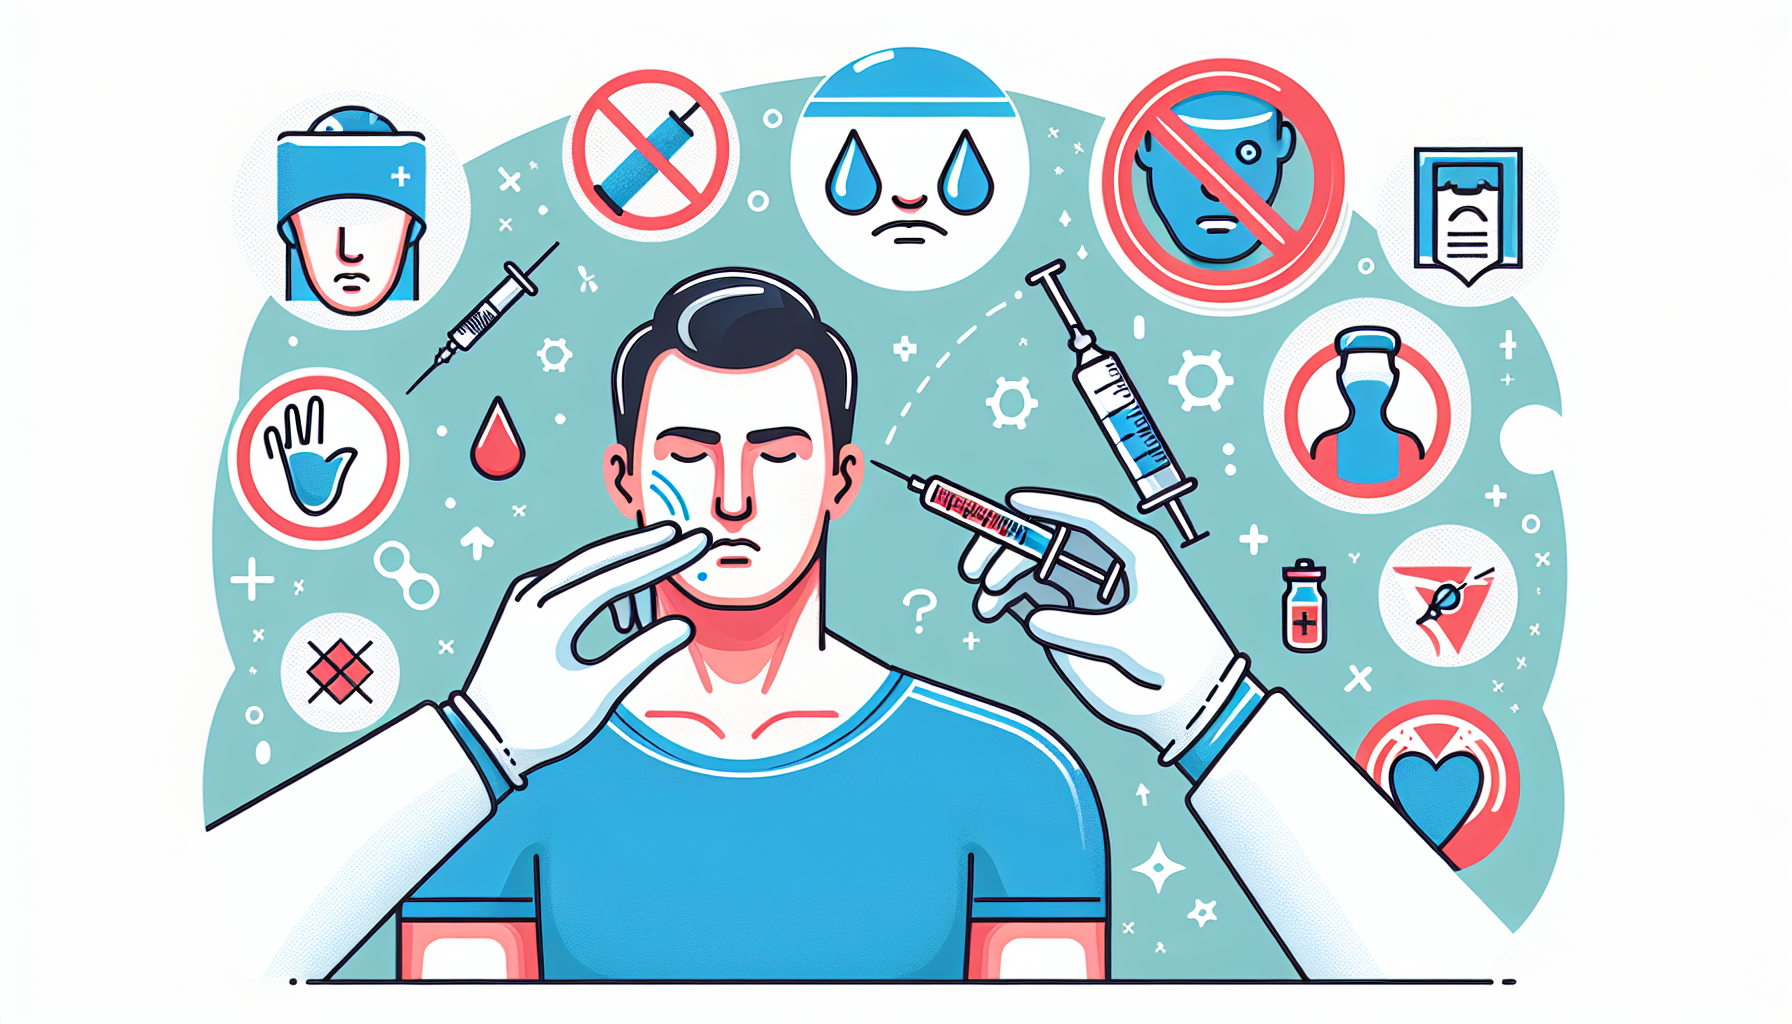 Illustration of potential risks and side effects